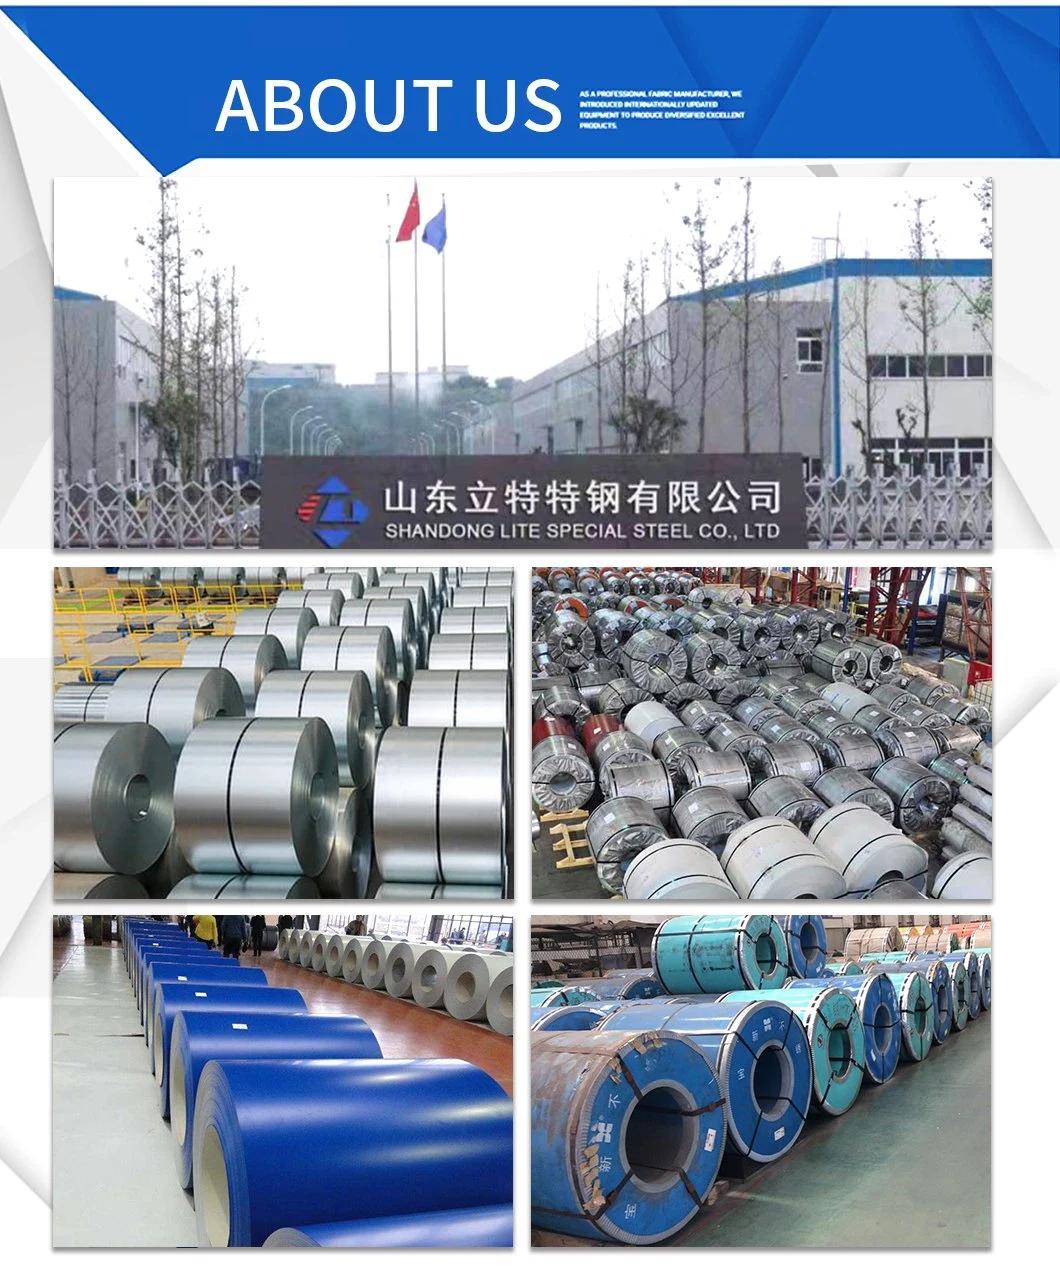 Prime Quality SPCC St12 DC01 DC02 Cold Rolled Steel Coil Hot DIP Galvanized Steel Coil